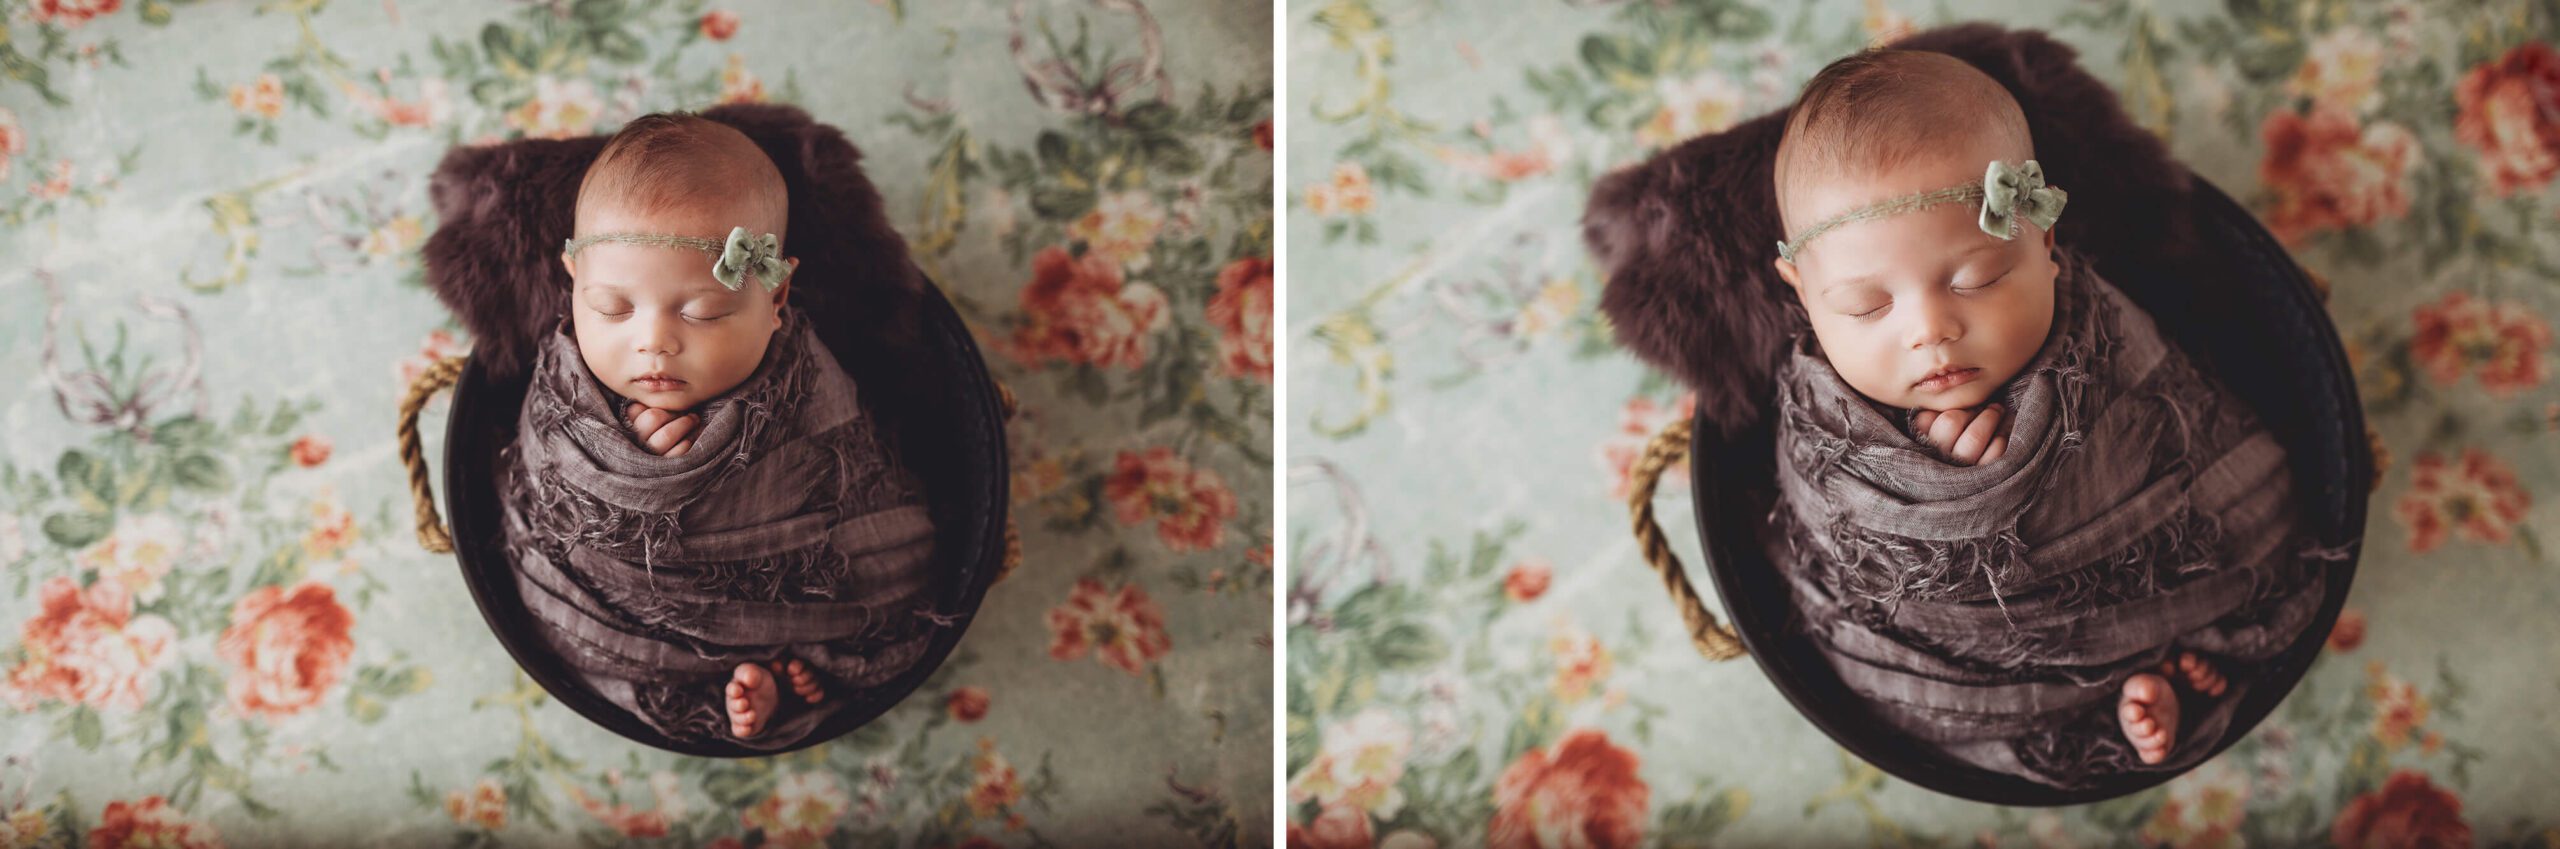 Purple wrap and fur, and vintage floral backdrop for Rubi's newborn session 